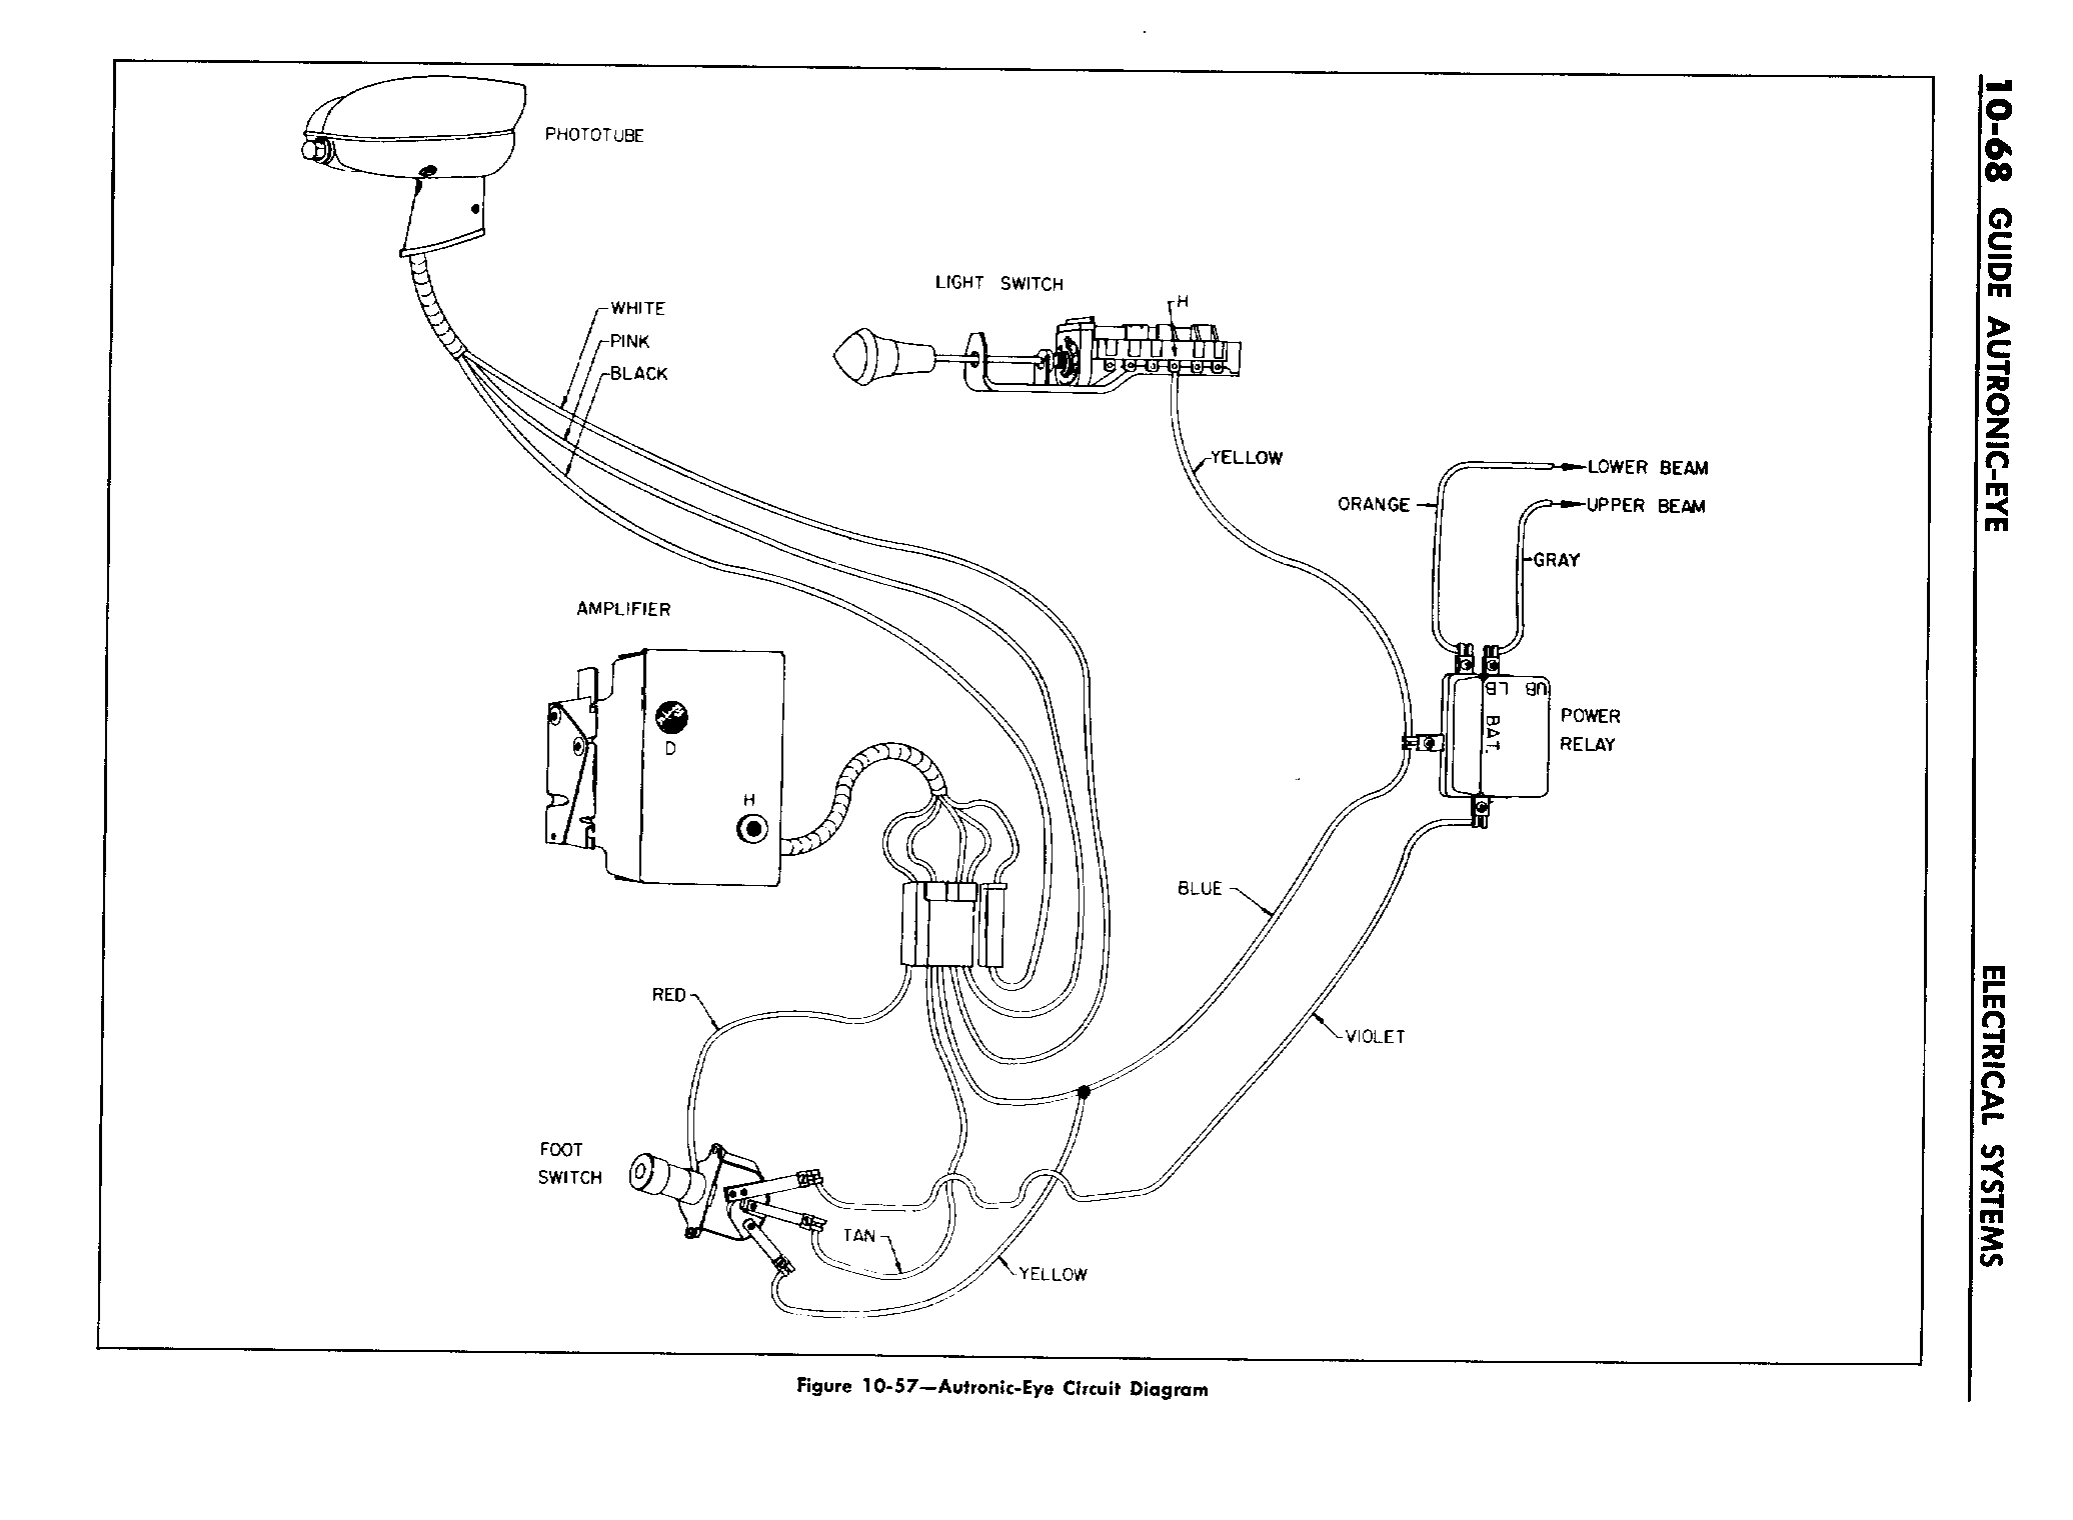 n_11 1958 Buick Shop Manual - Electrical Systems_68.jpg